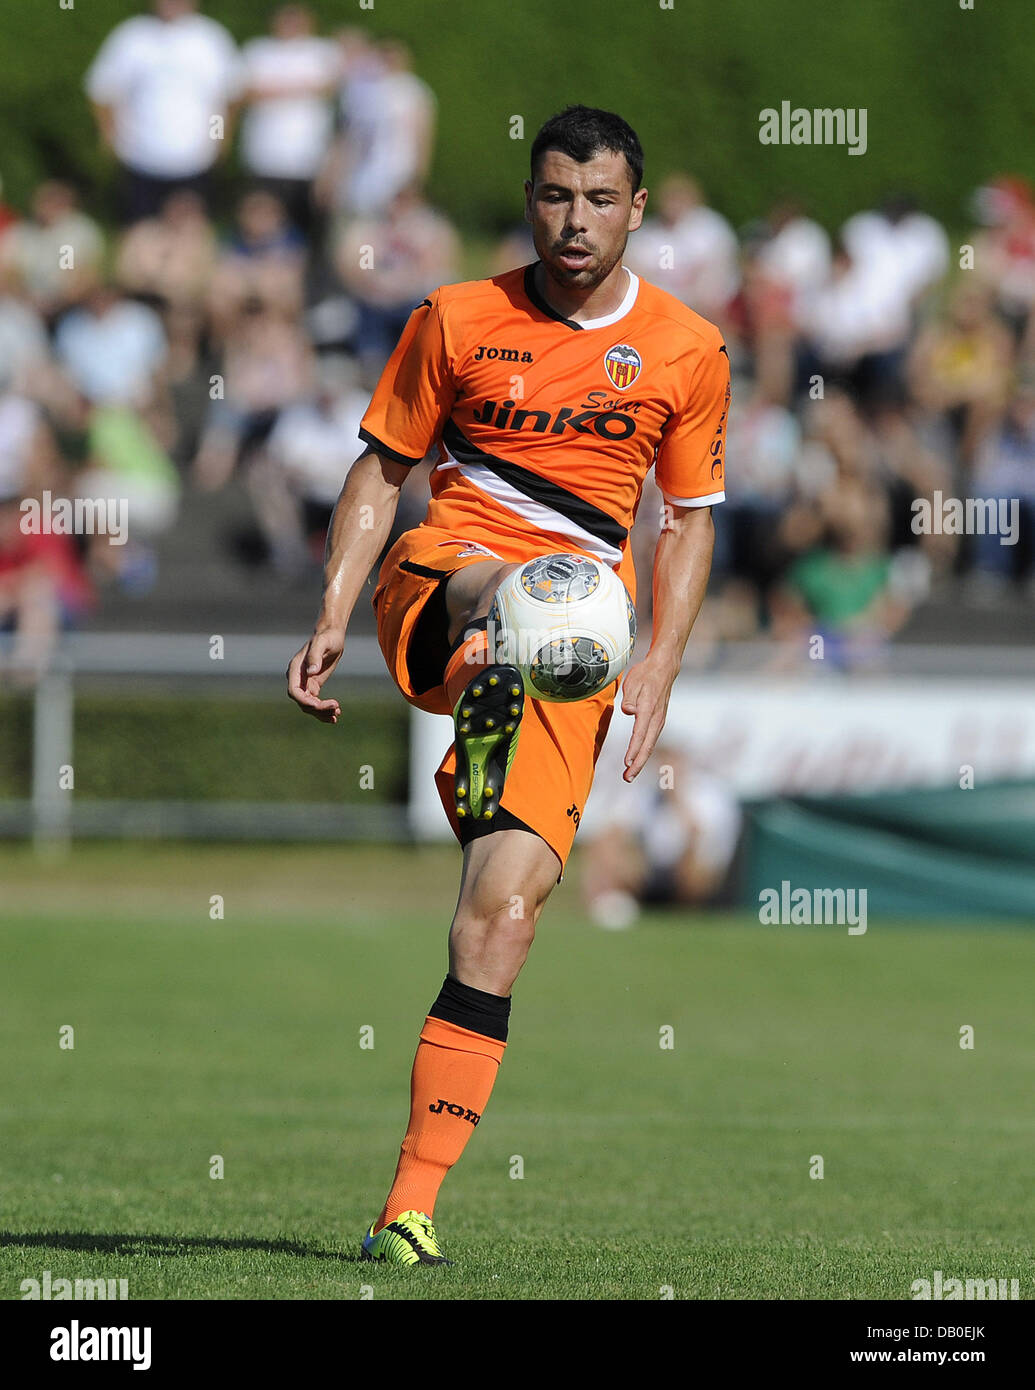 Ludwigsburg, Germany. 20th July, 2013. Javi Fuego of Valencia plays the ball during the test match VfB Stuttgart vs FC Valencia in the Ludwig-Jahn-Stadion in Ludwigsburg, Germany, 20 July 2013. Photo: DANIEL MAURER/dpa/Alamy Live News Stock Photo